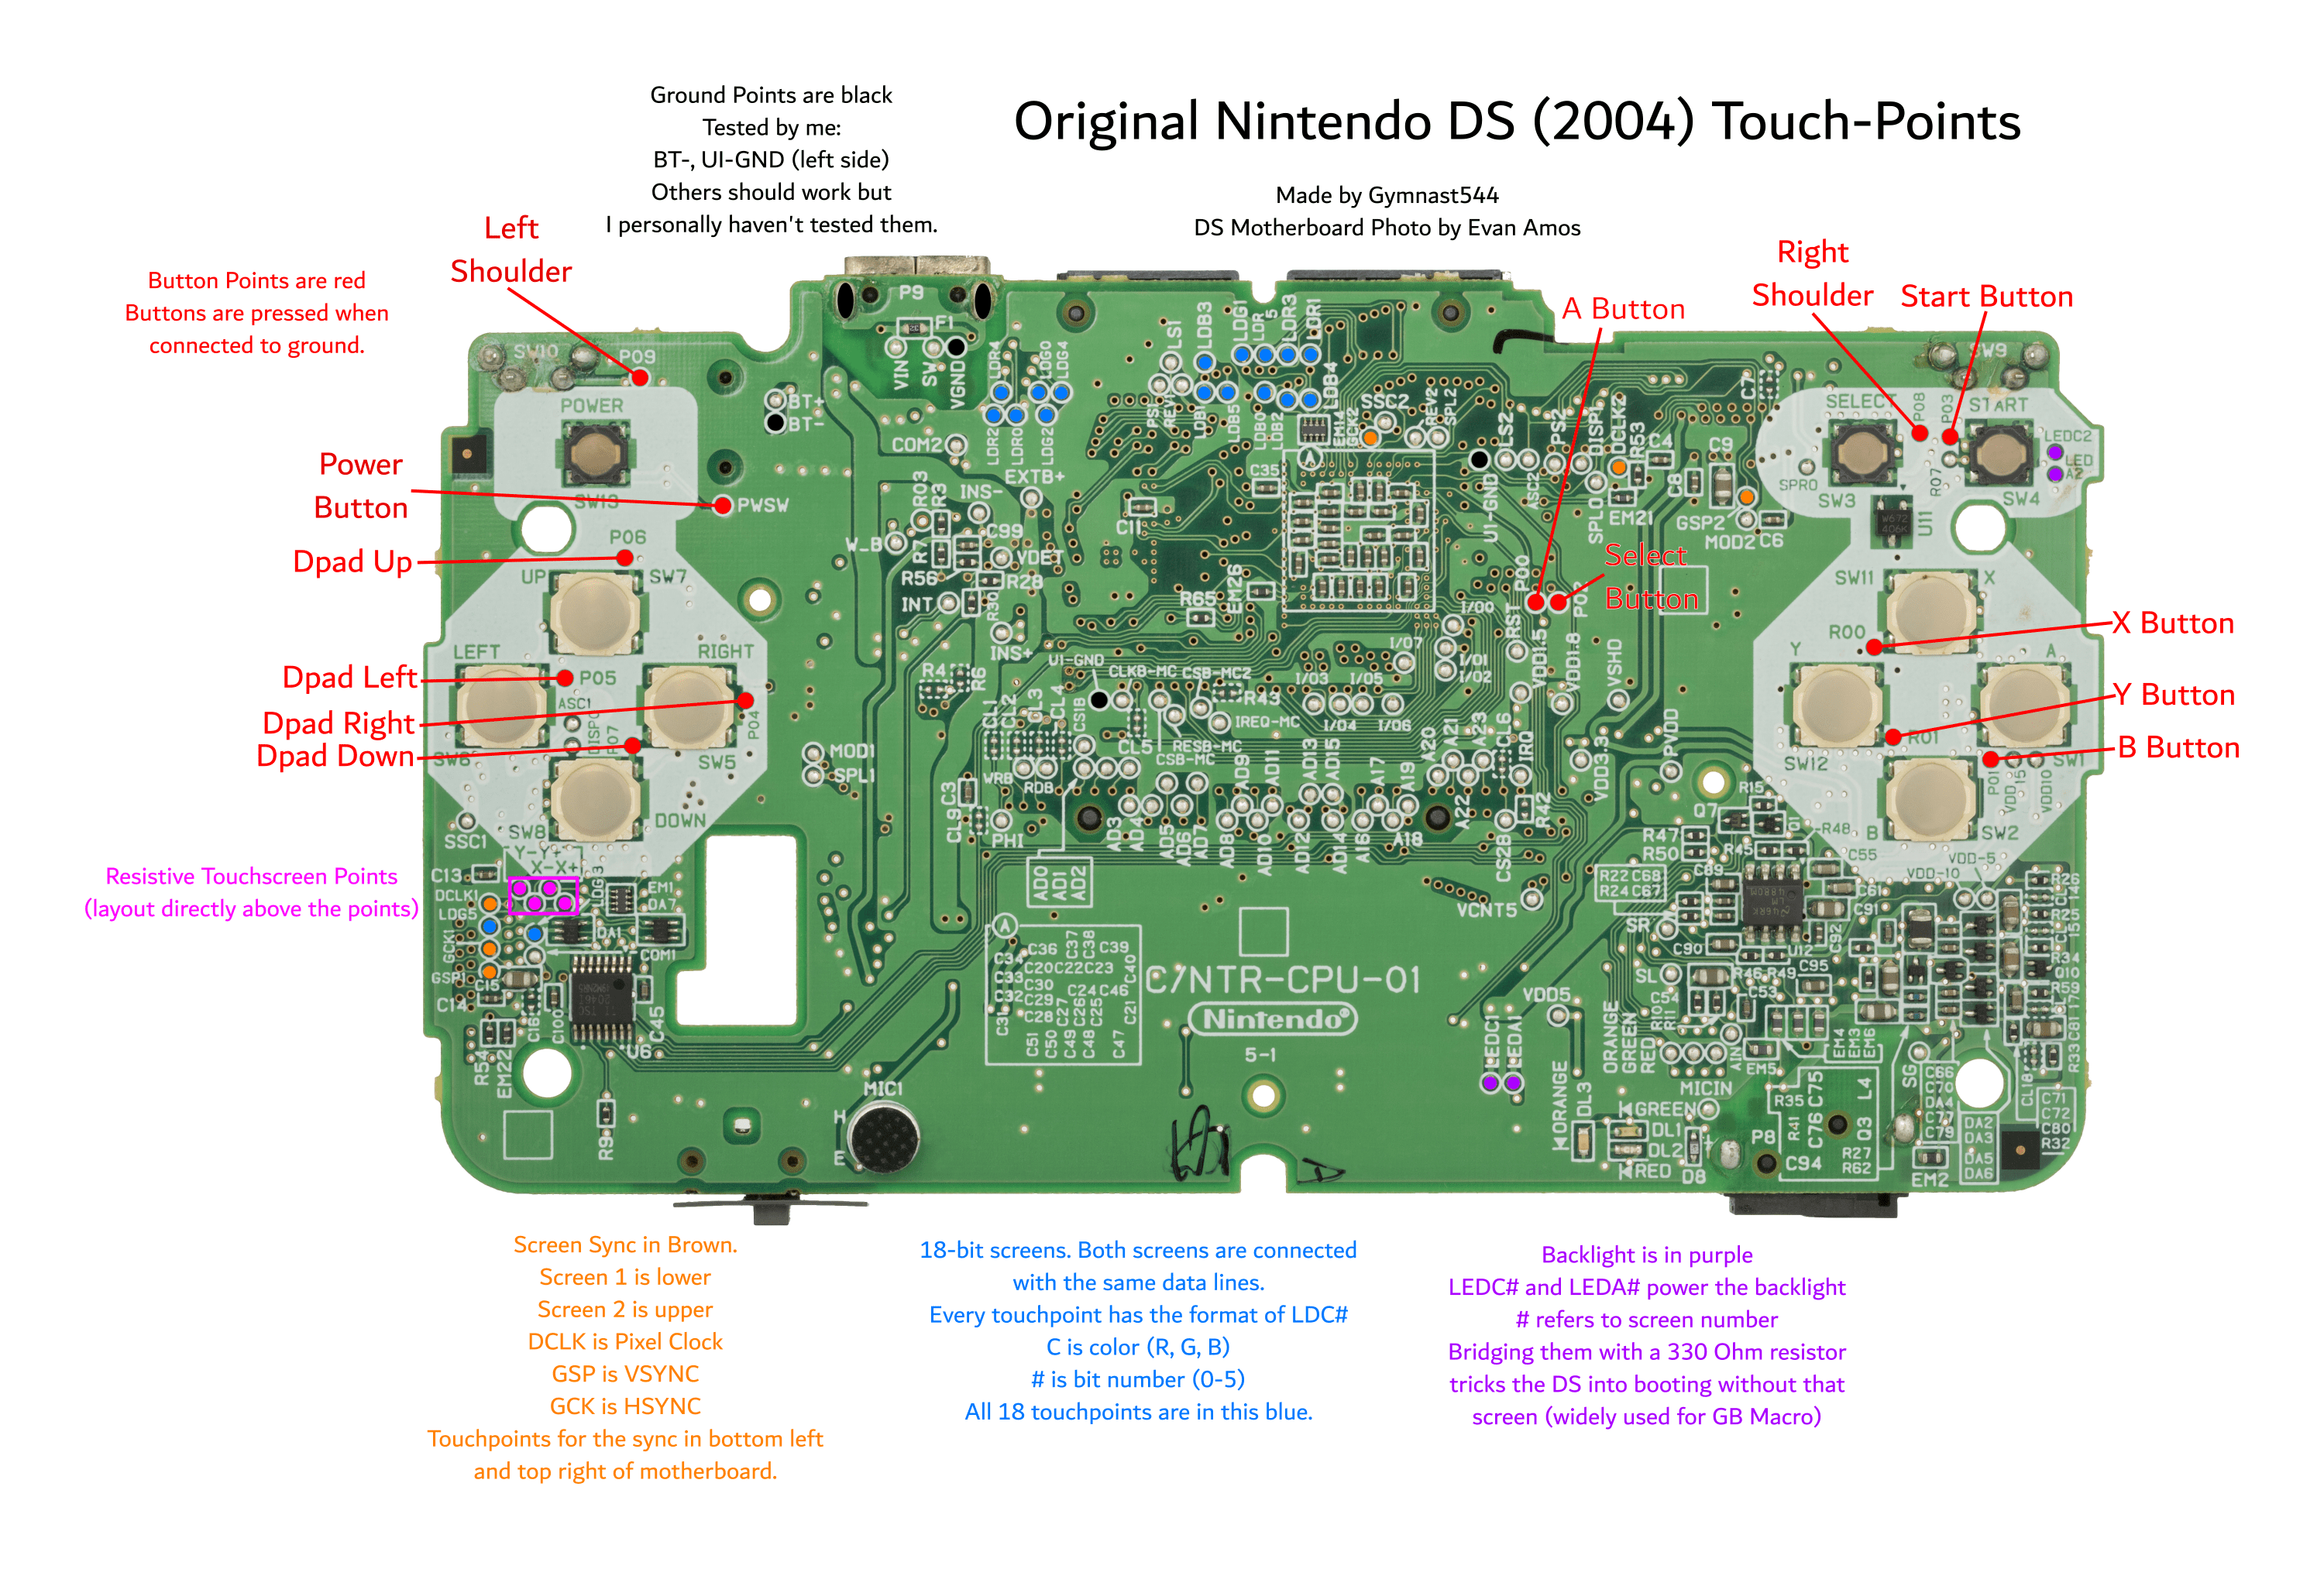 Original DS motherboard with touch-points labeled